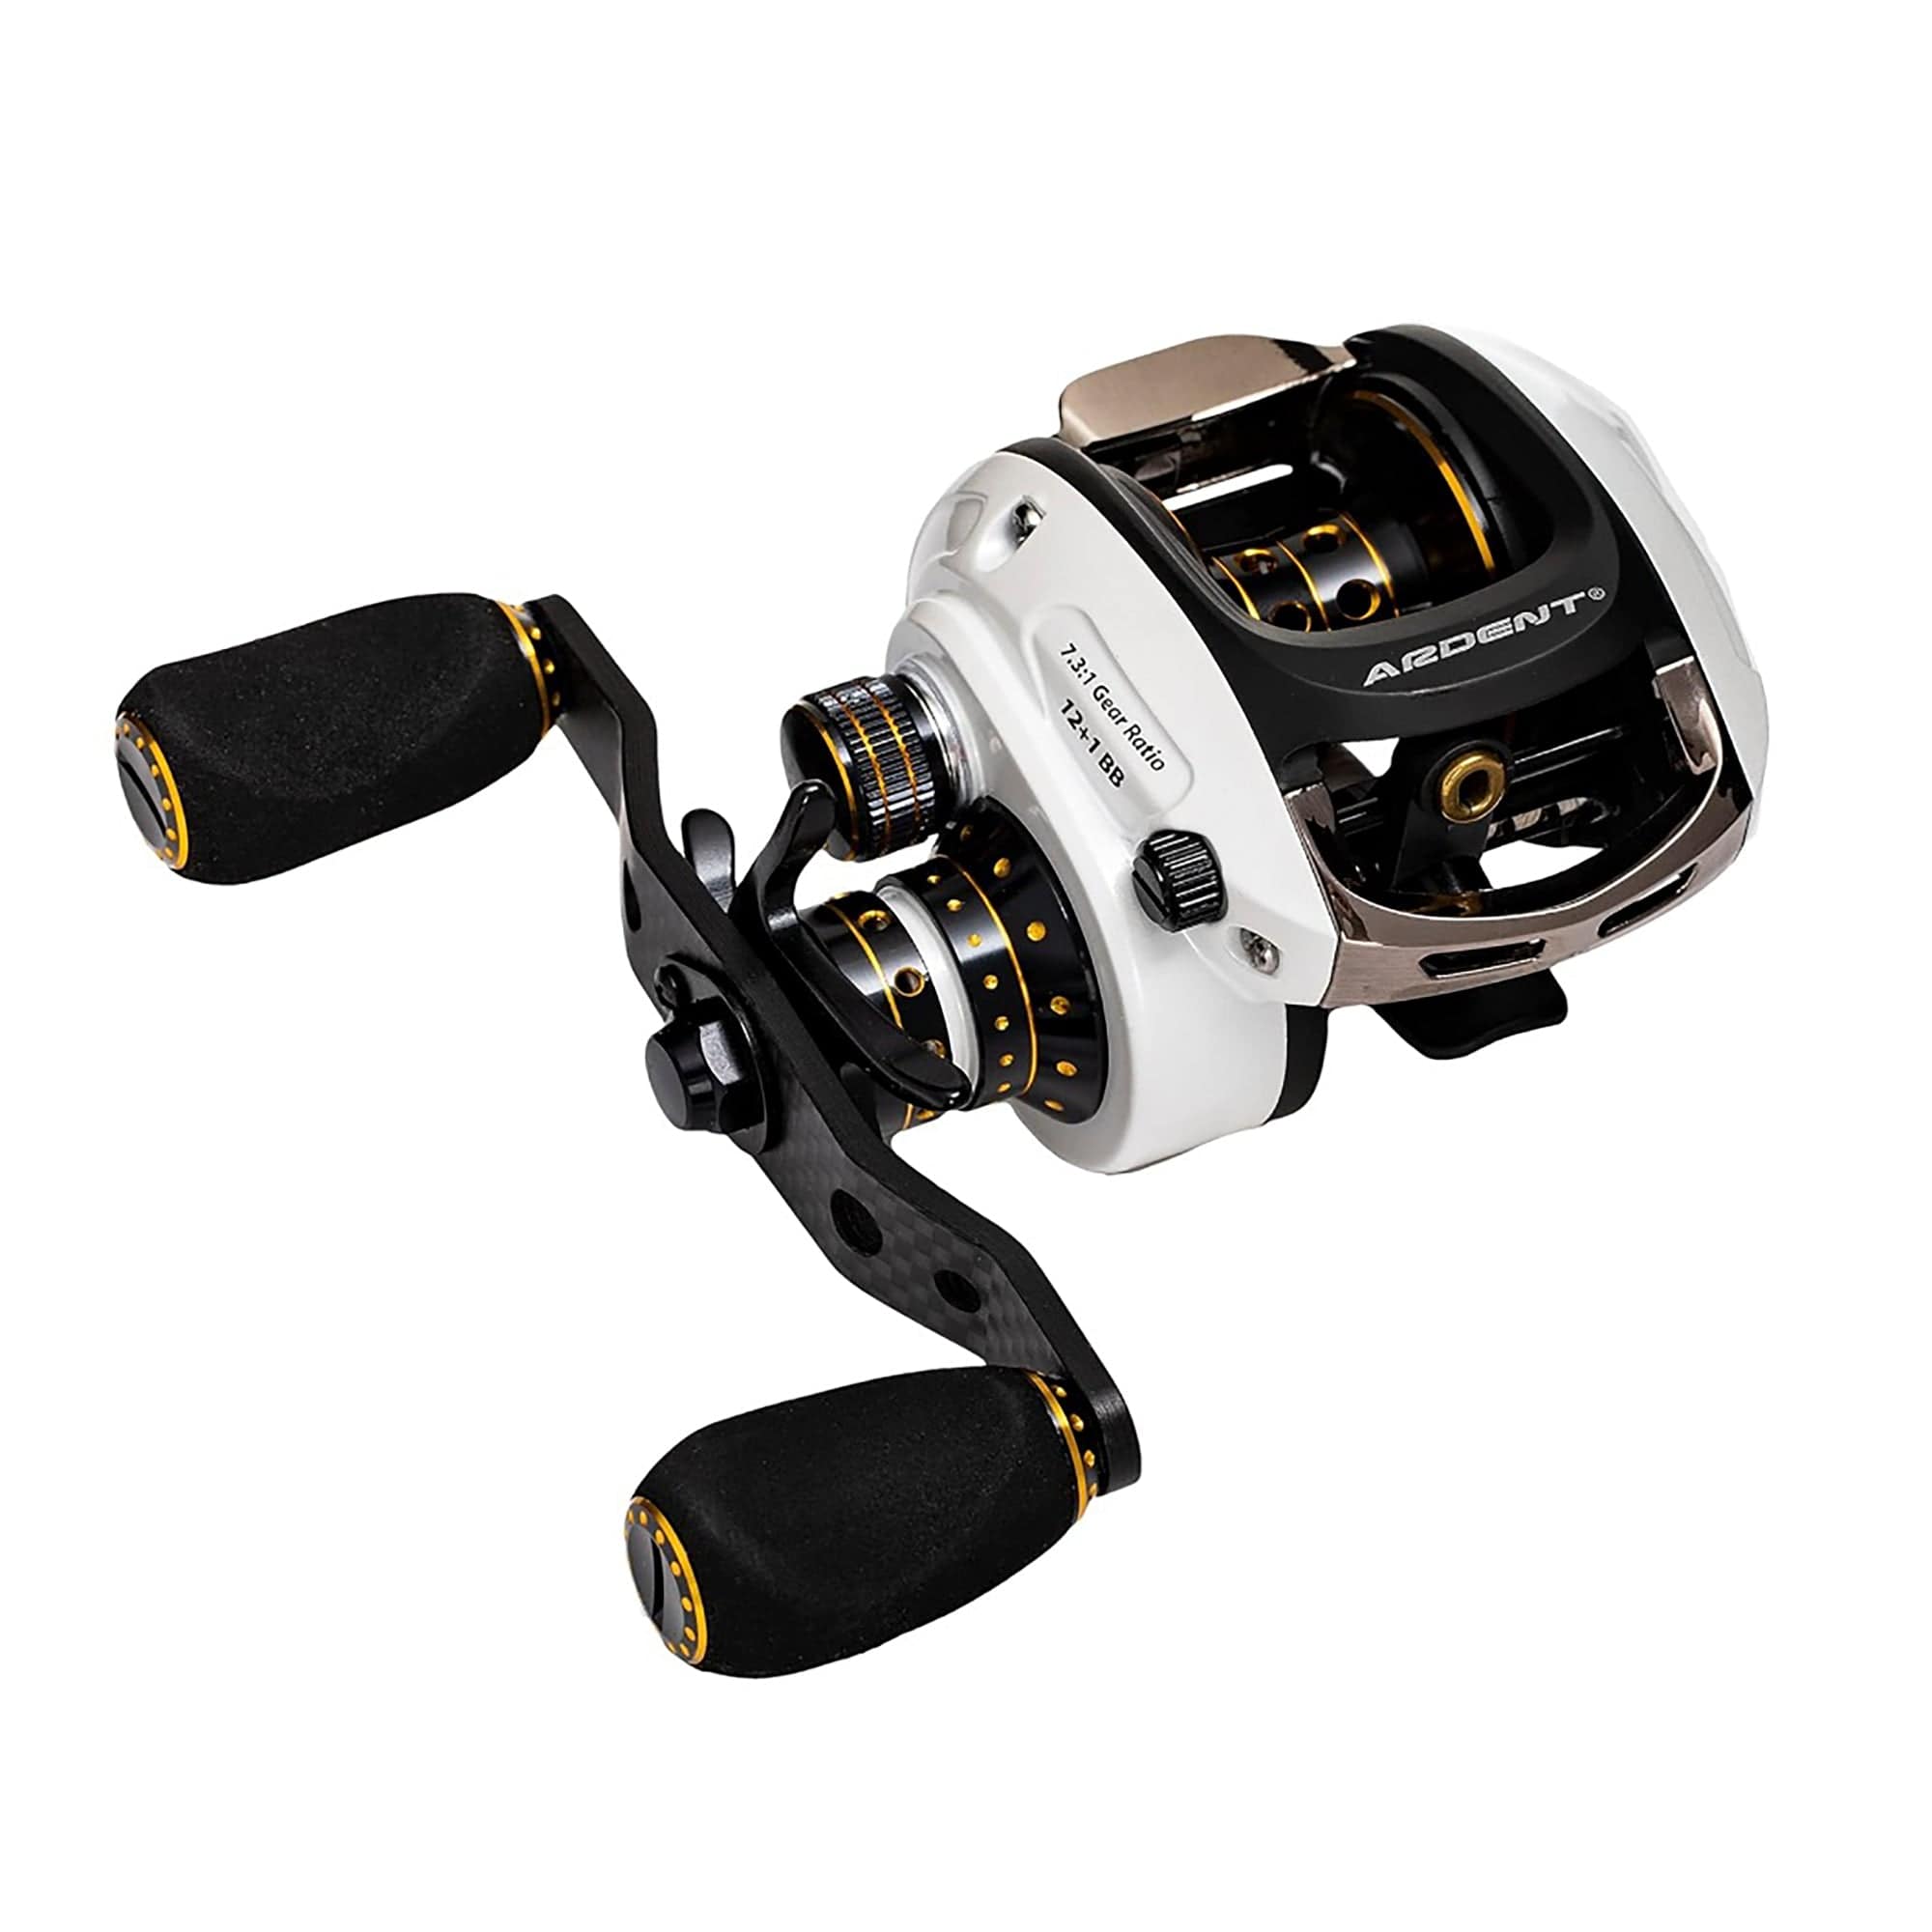 Ardent AAG65RBA Apex Grand 6:5:1 Fishing Reel, Right Handed